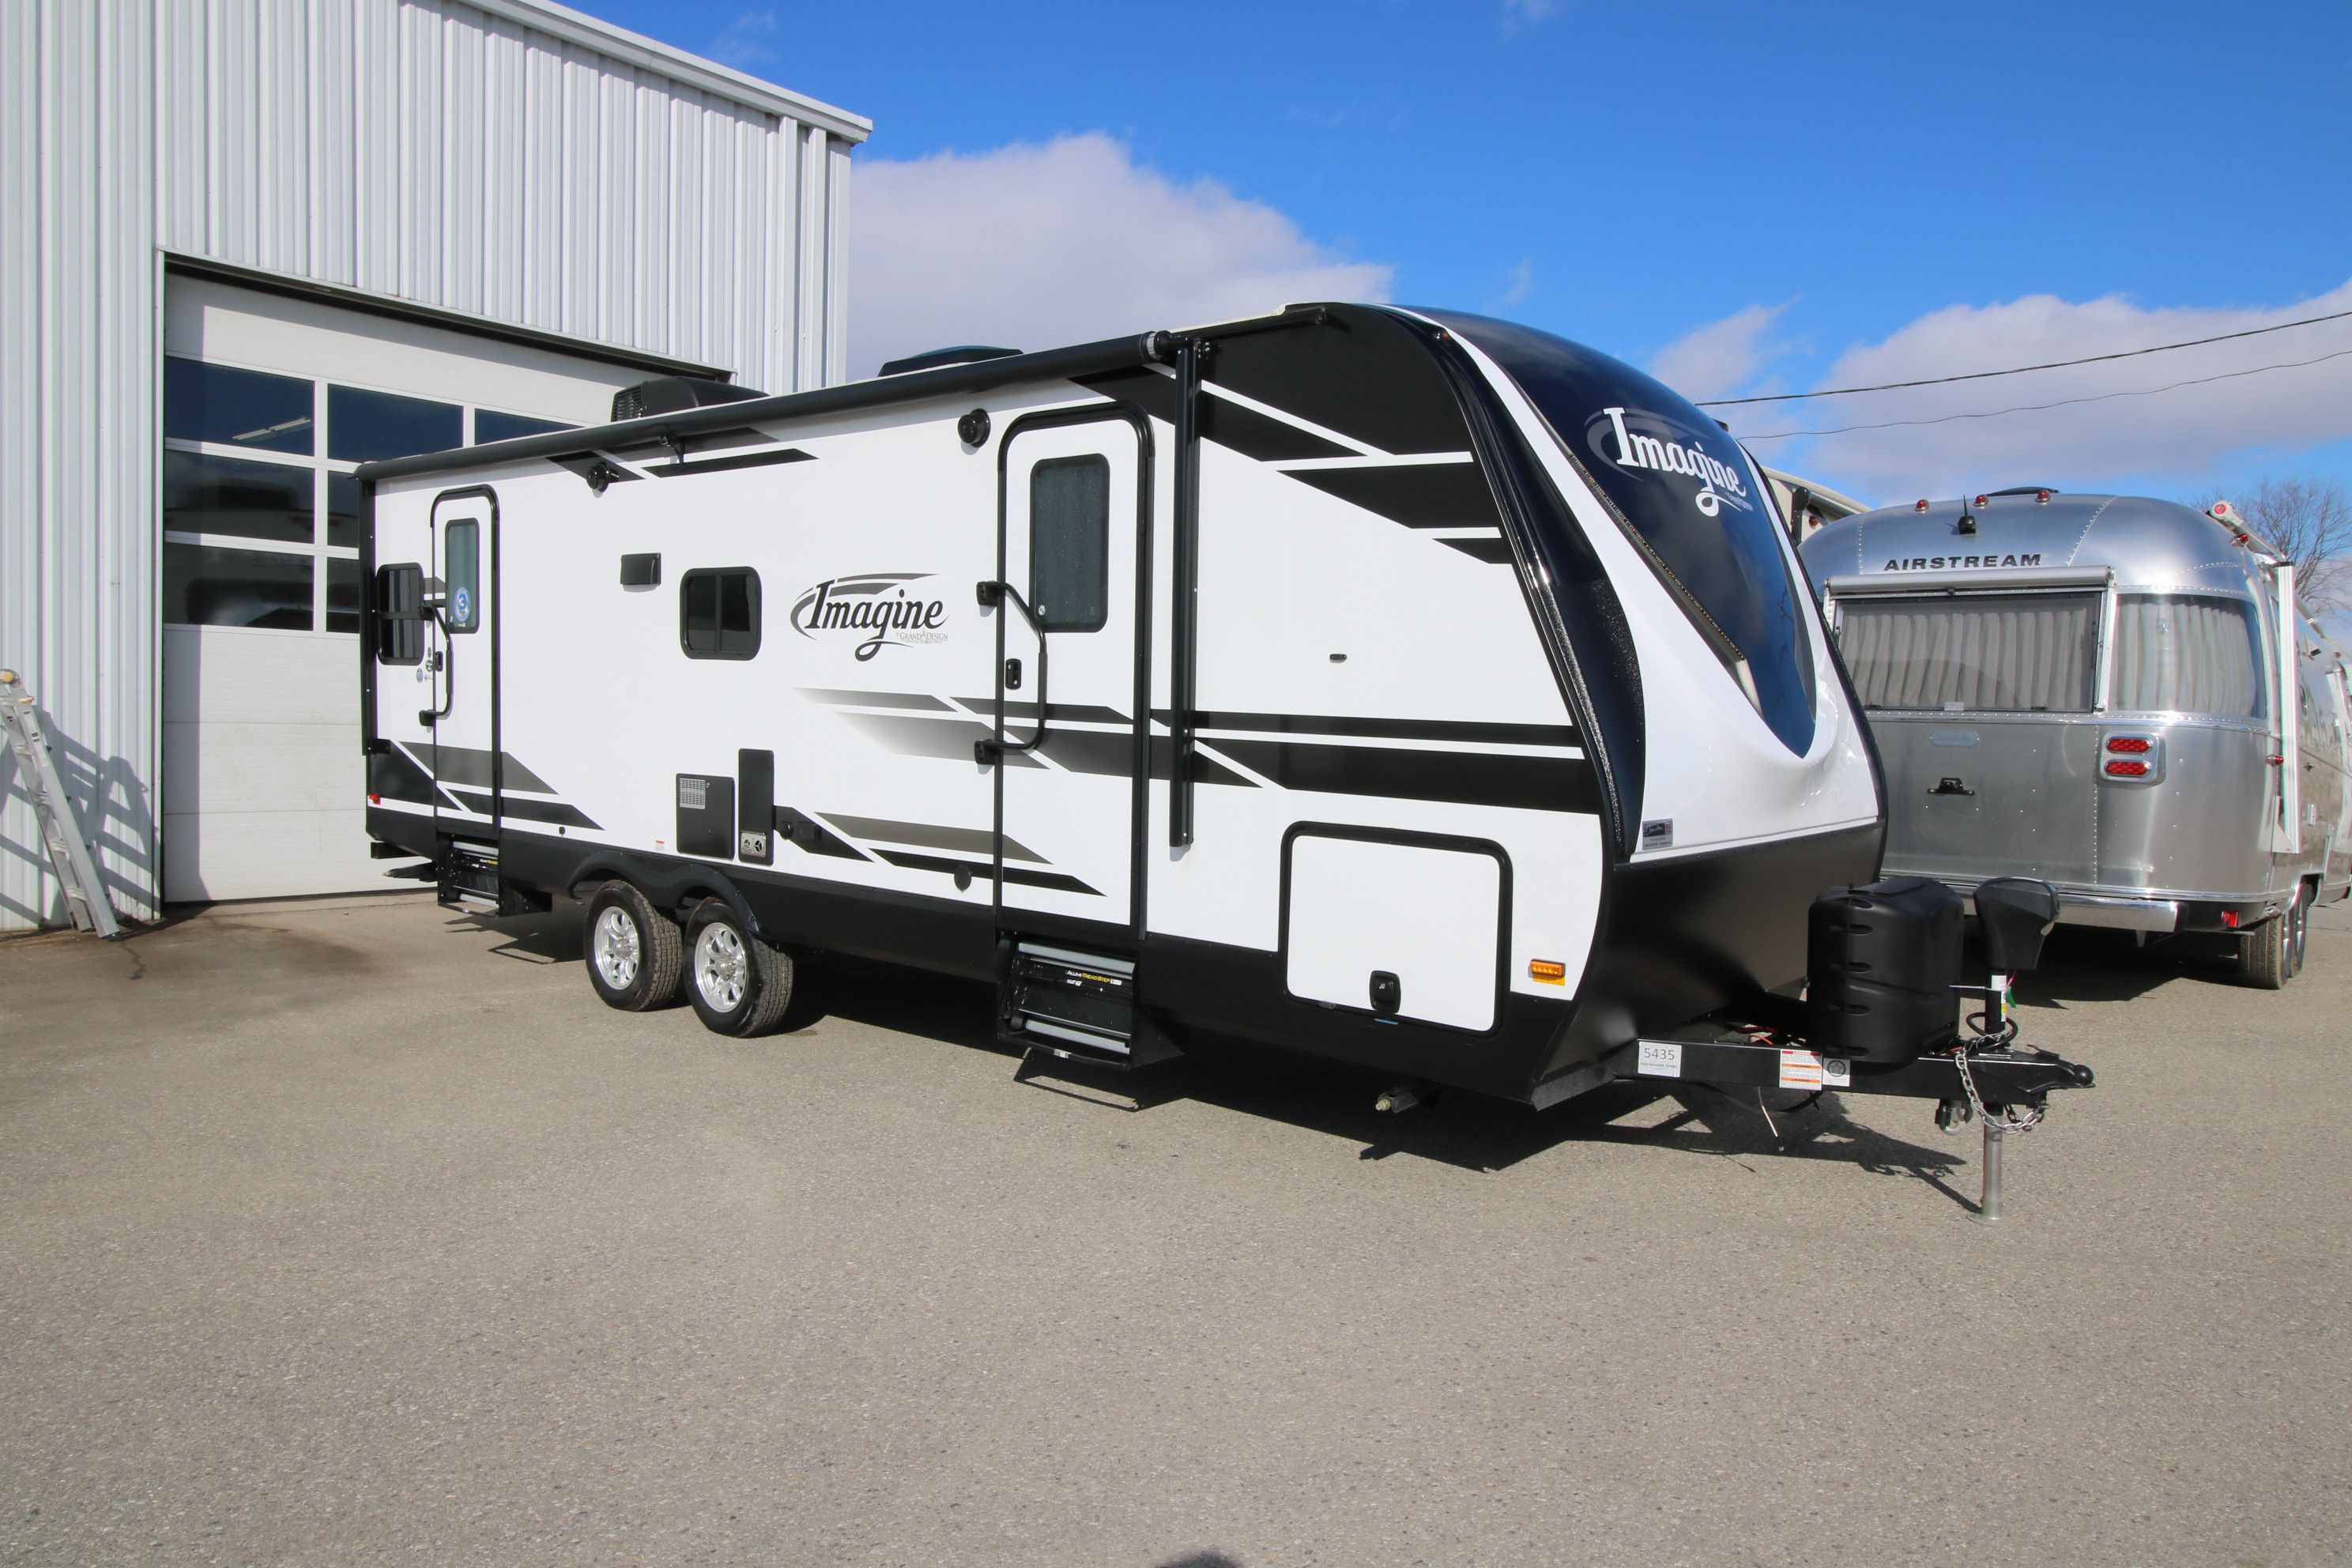 25' travel trailers for sale